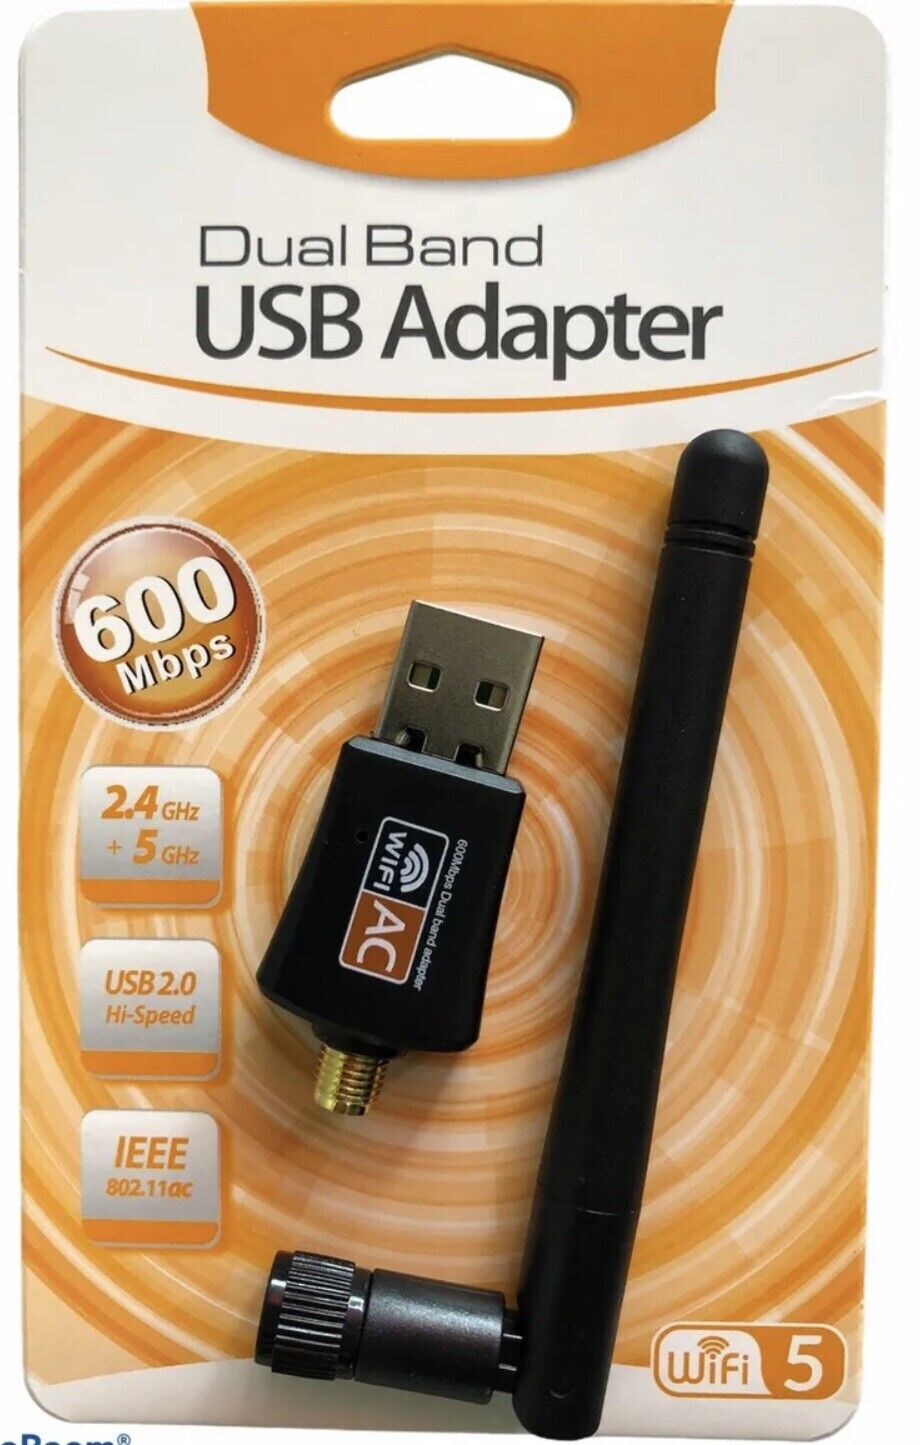 600Mbps Wireless USB WiFi Adapter Dongle